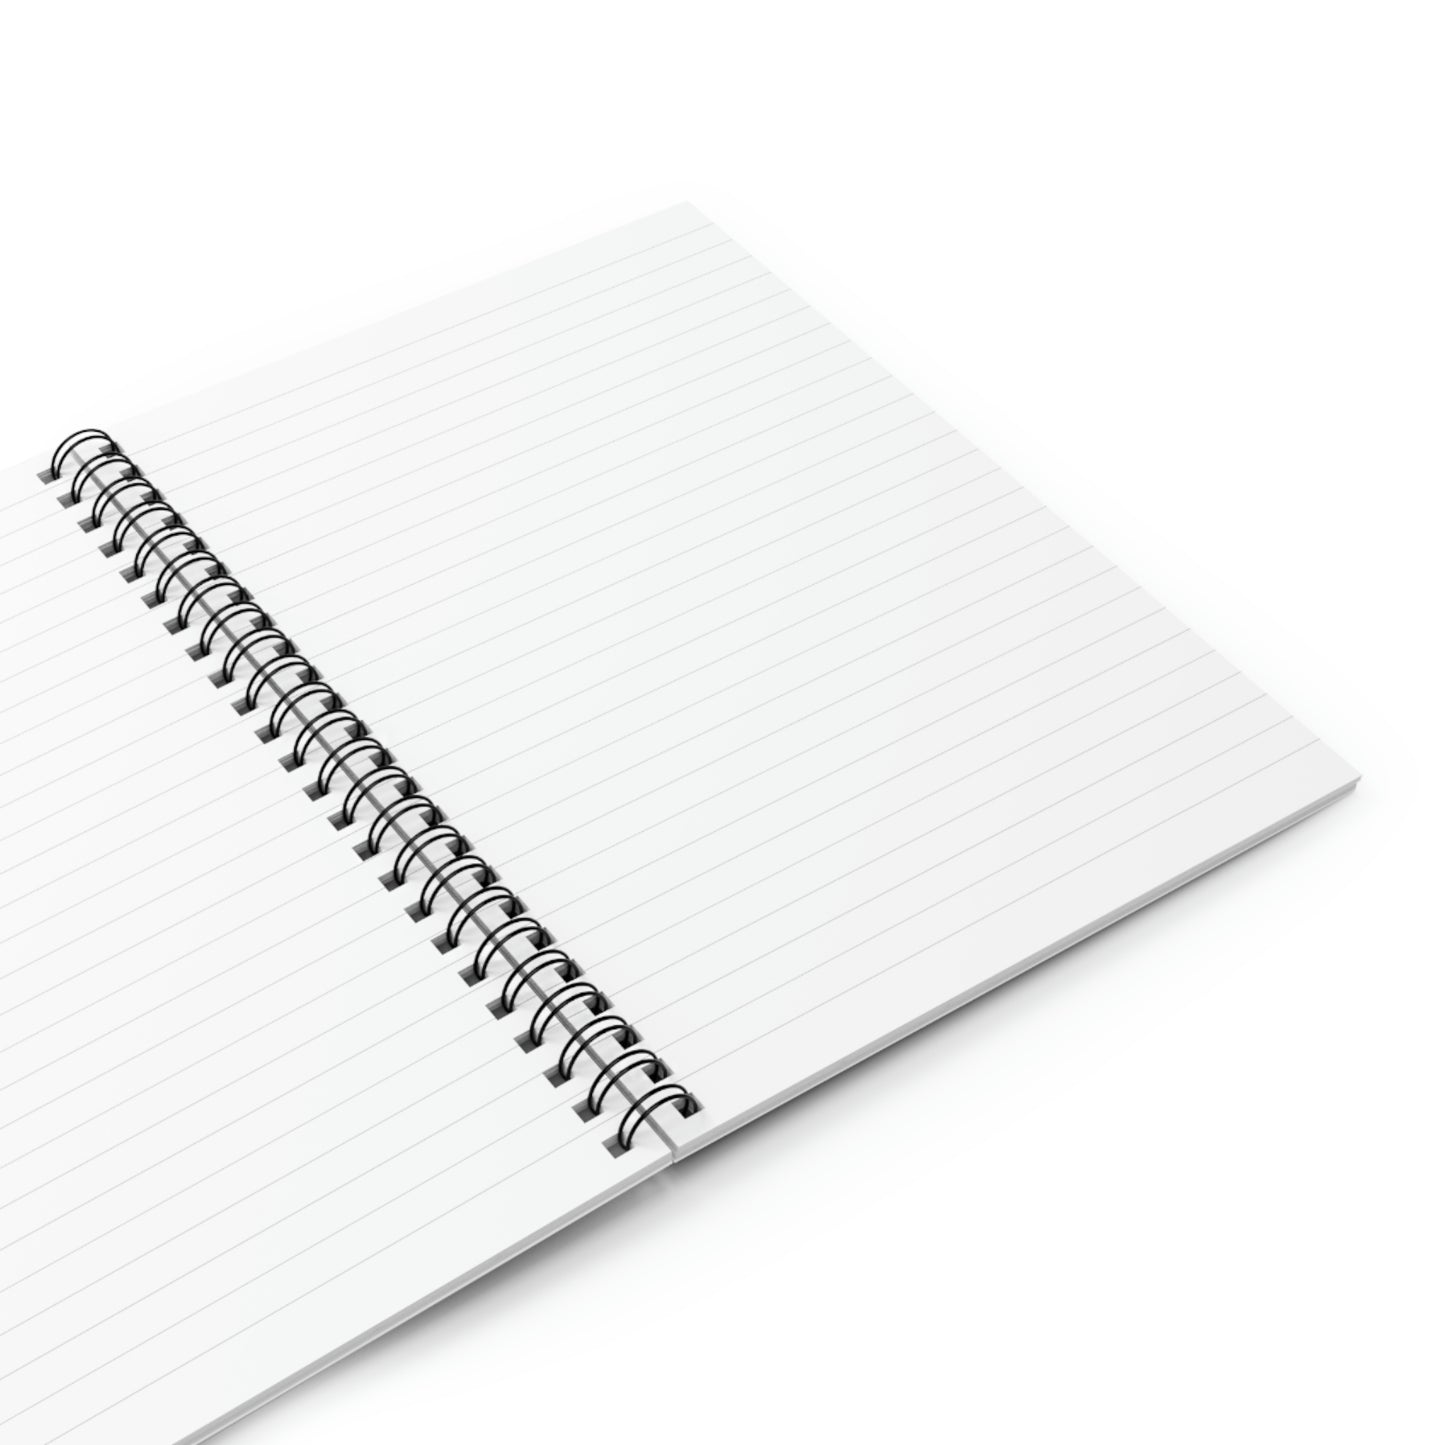 The Kitty Cat Cried! Spiral Notebook - Ruled Line